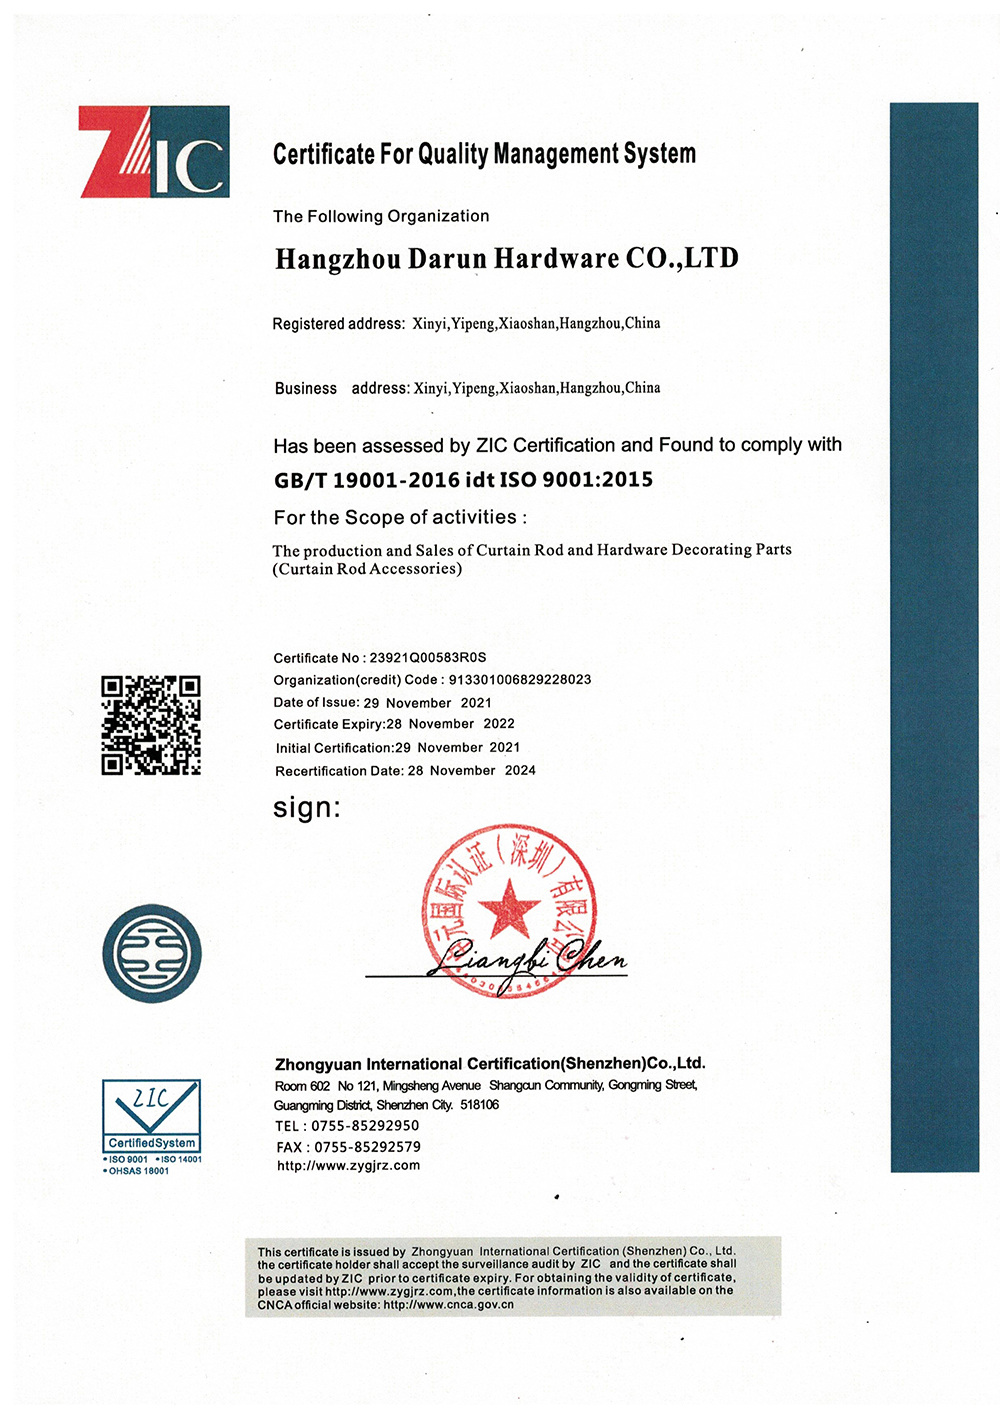 Certifiacte for Quality Management System